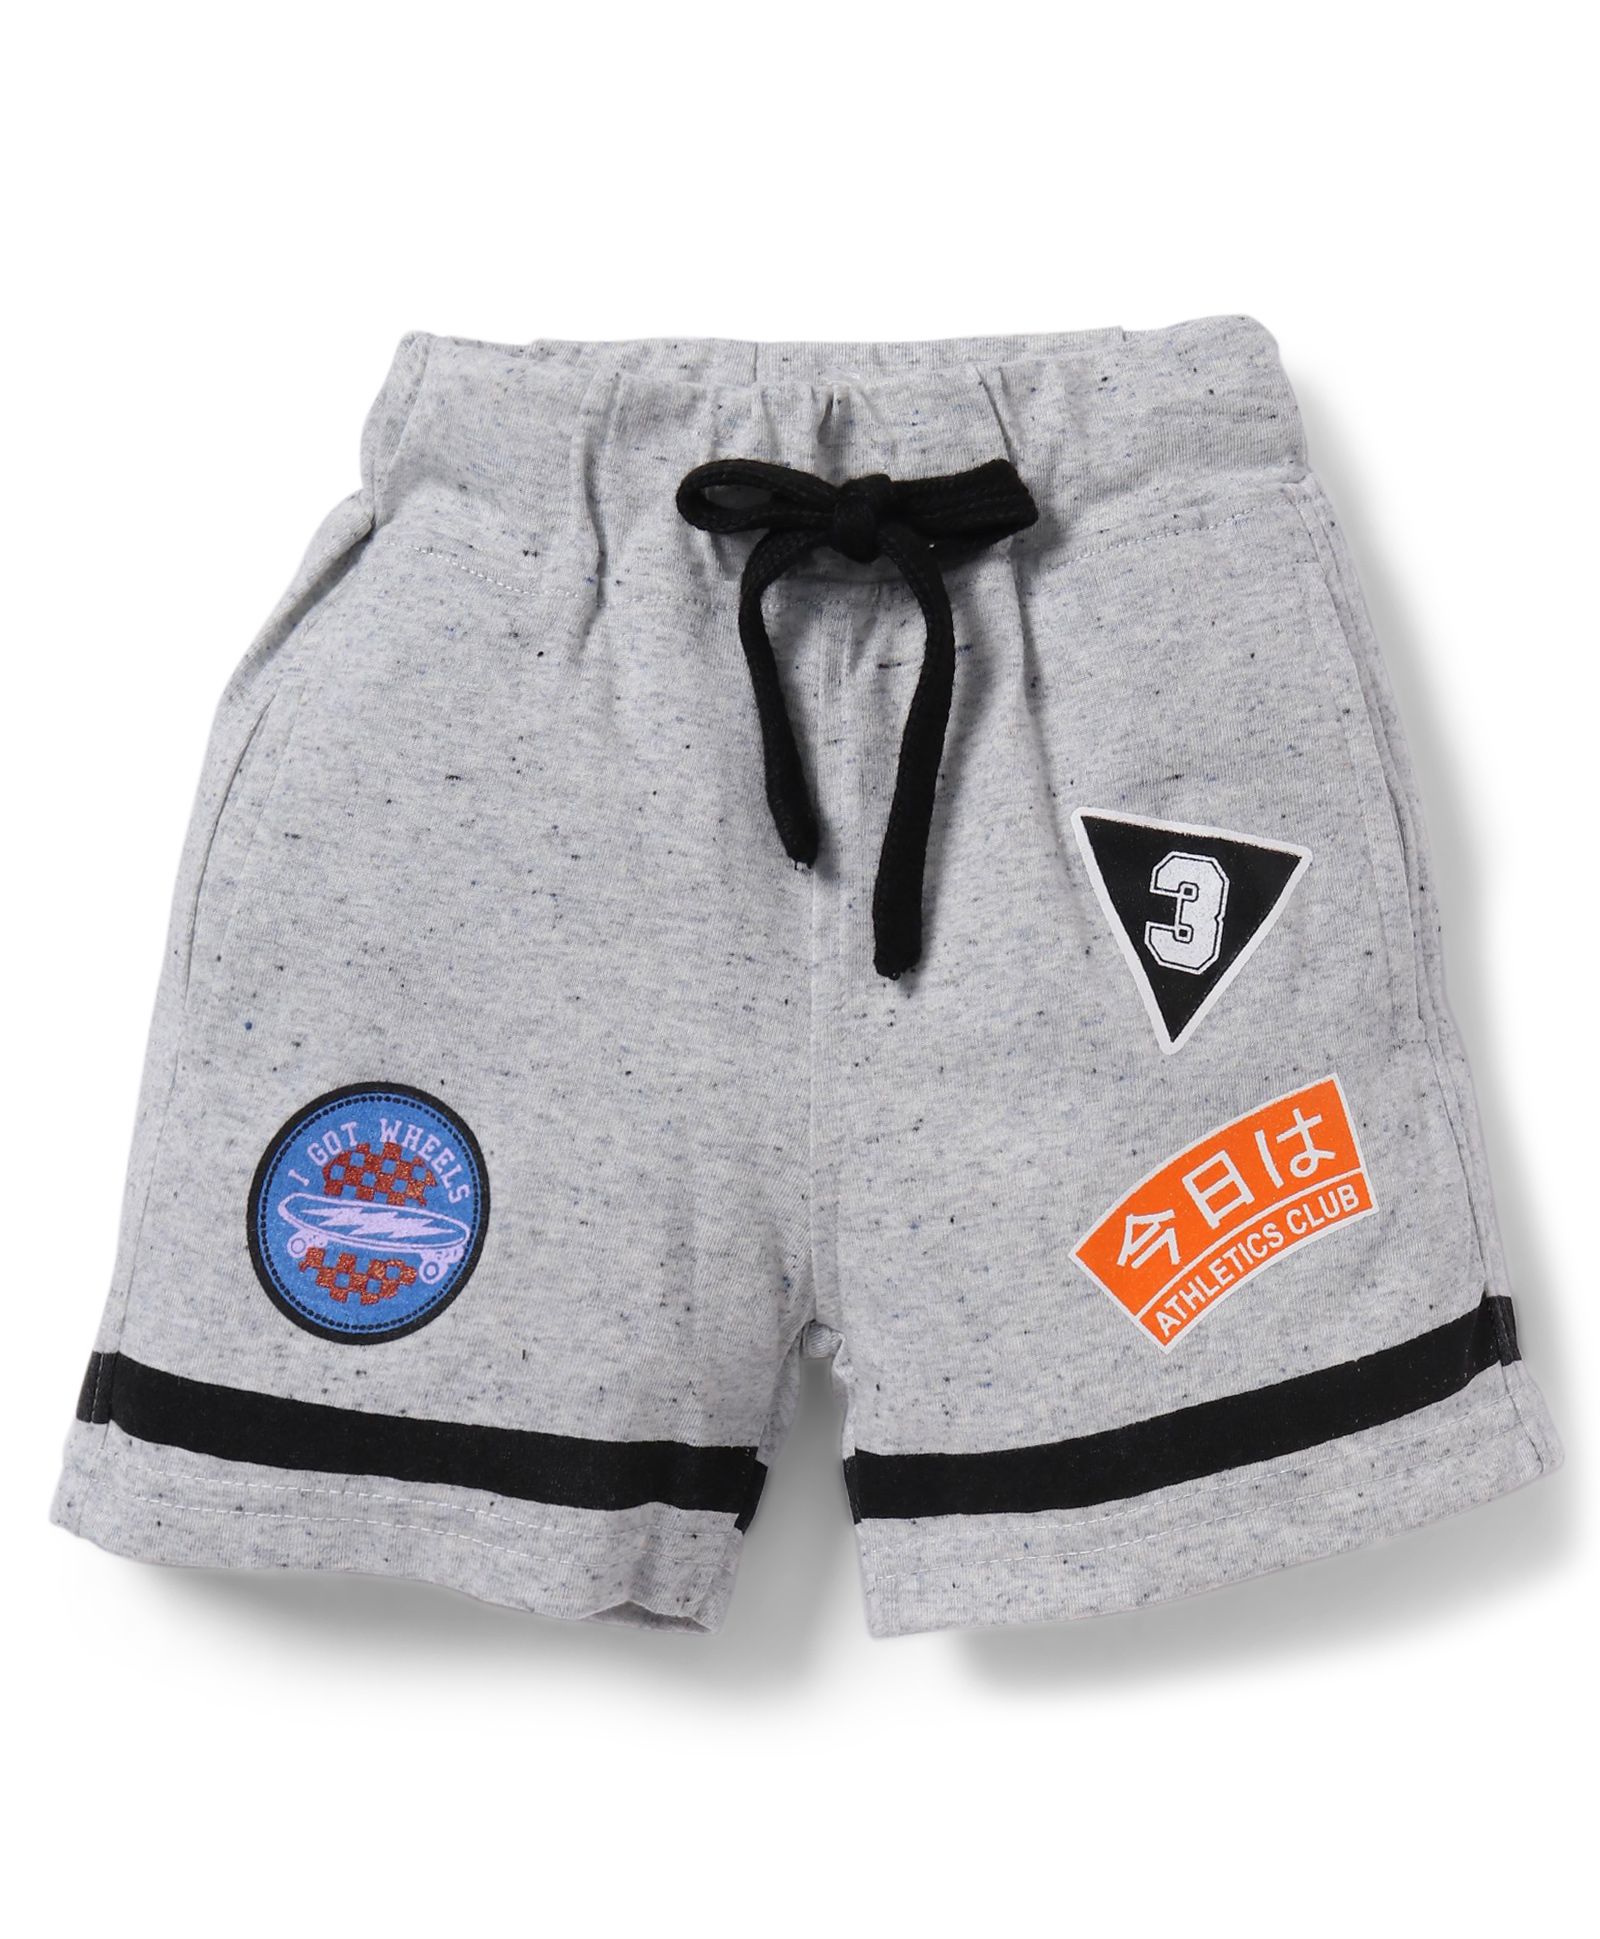 Shorts for Boys Kids Baby